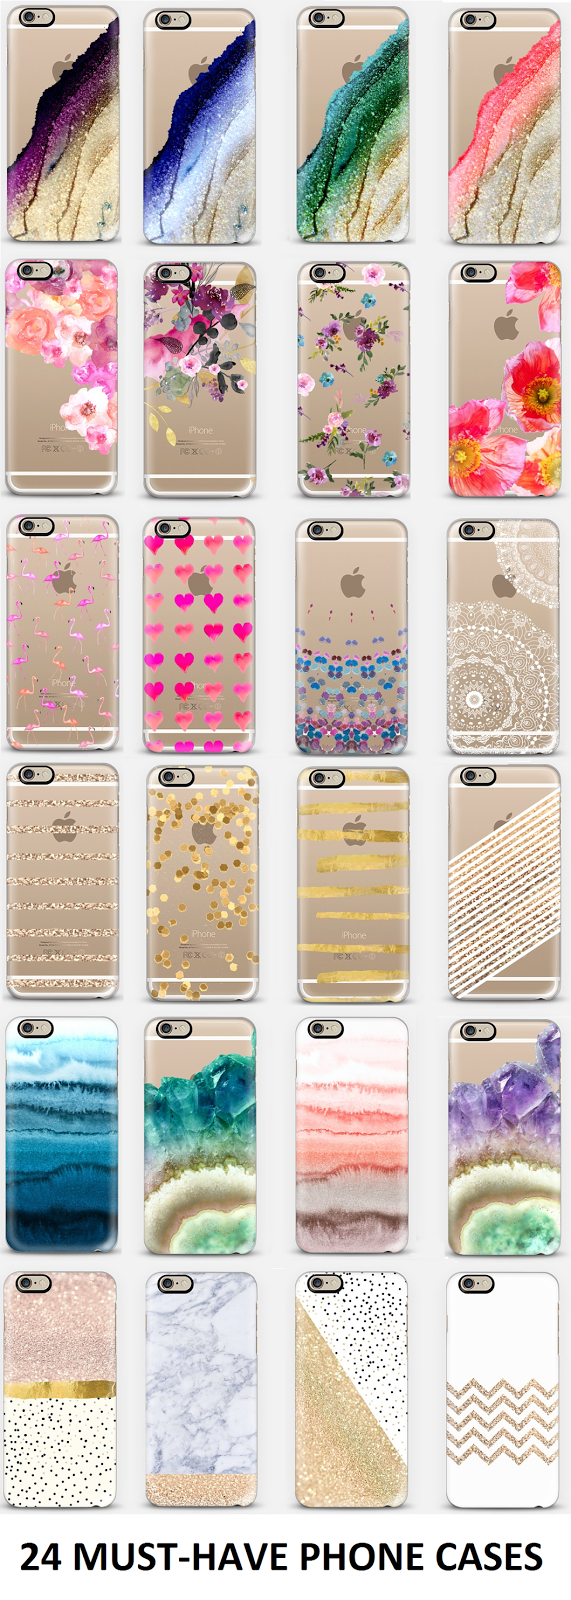 24 must-have phone cases